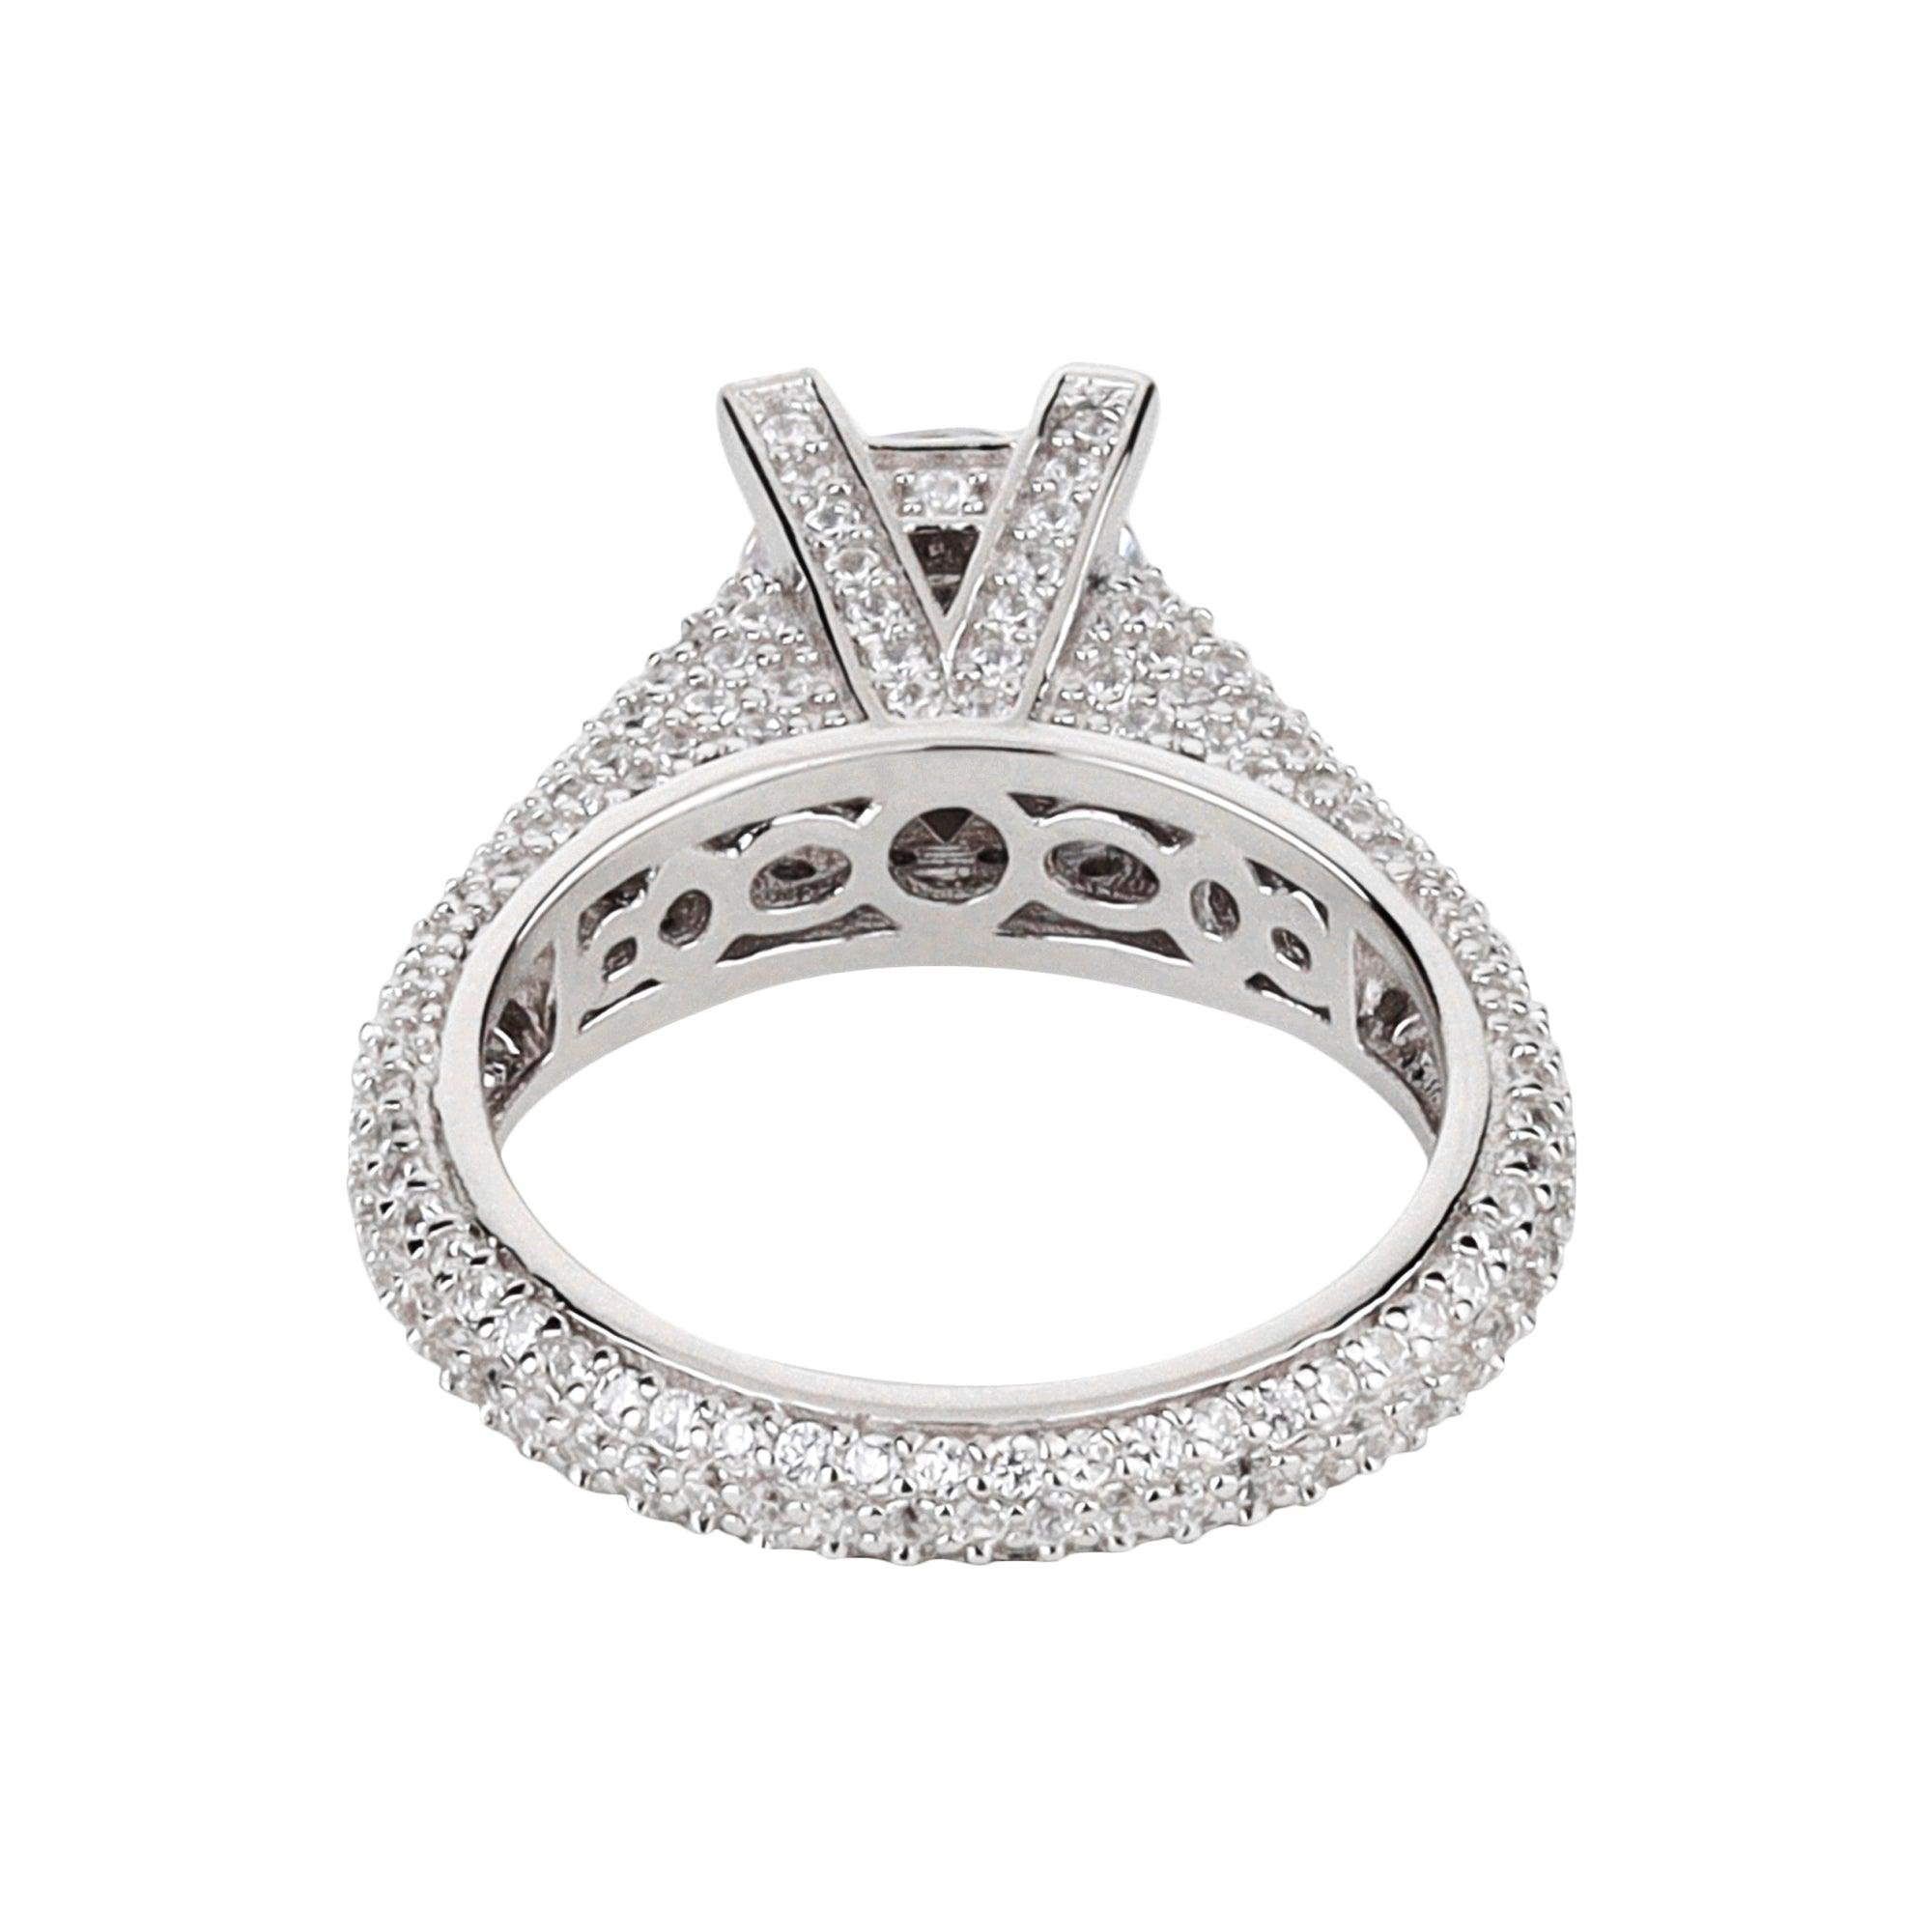 Special Luxury Stone Studded Ornate Ring - silvermark